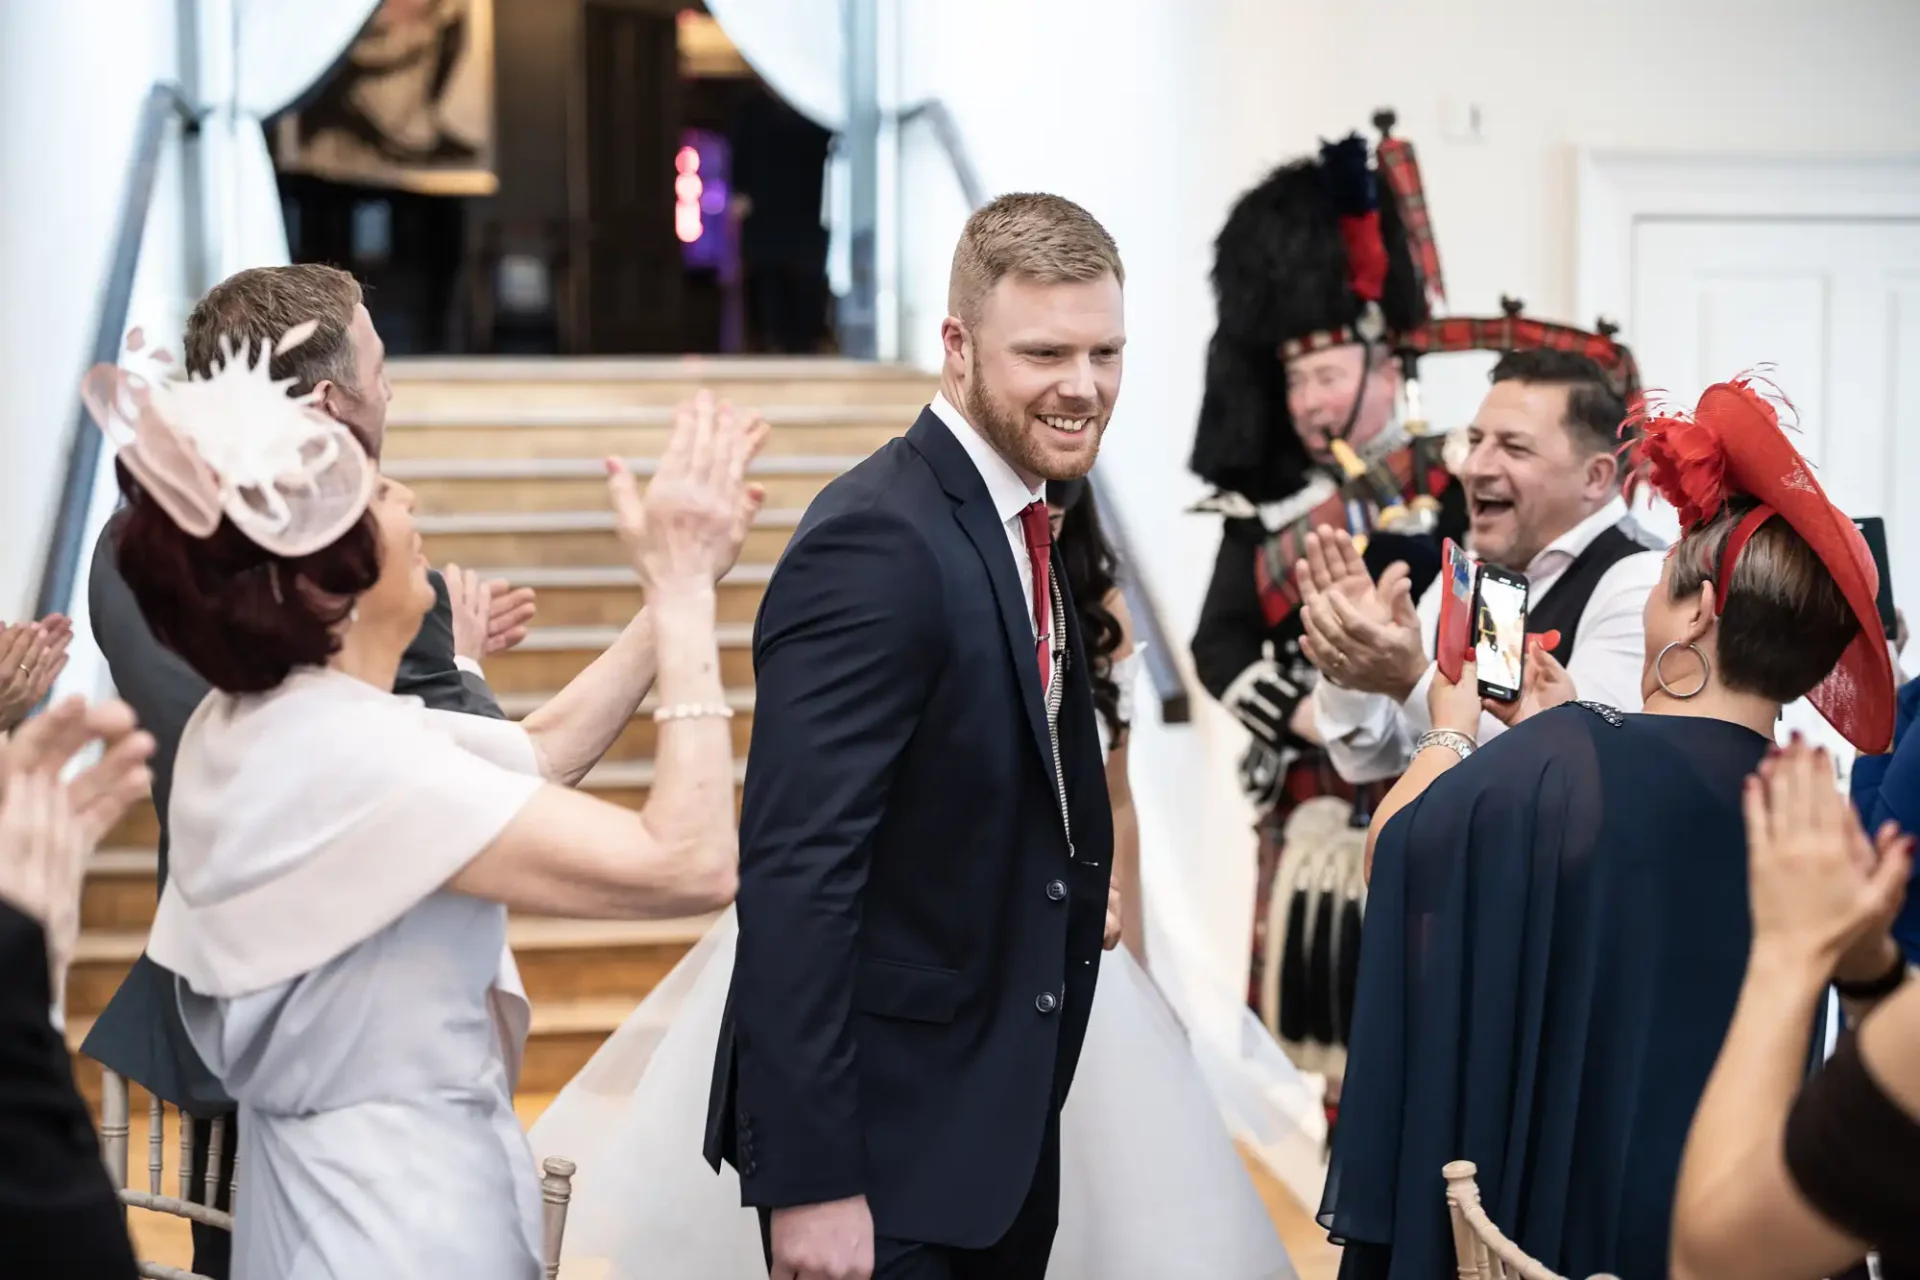 A groom walks down the aisle smiling, greeted by applauding guests in formal attire and two bagpipers in traditional scottish dress.